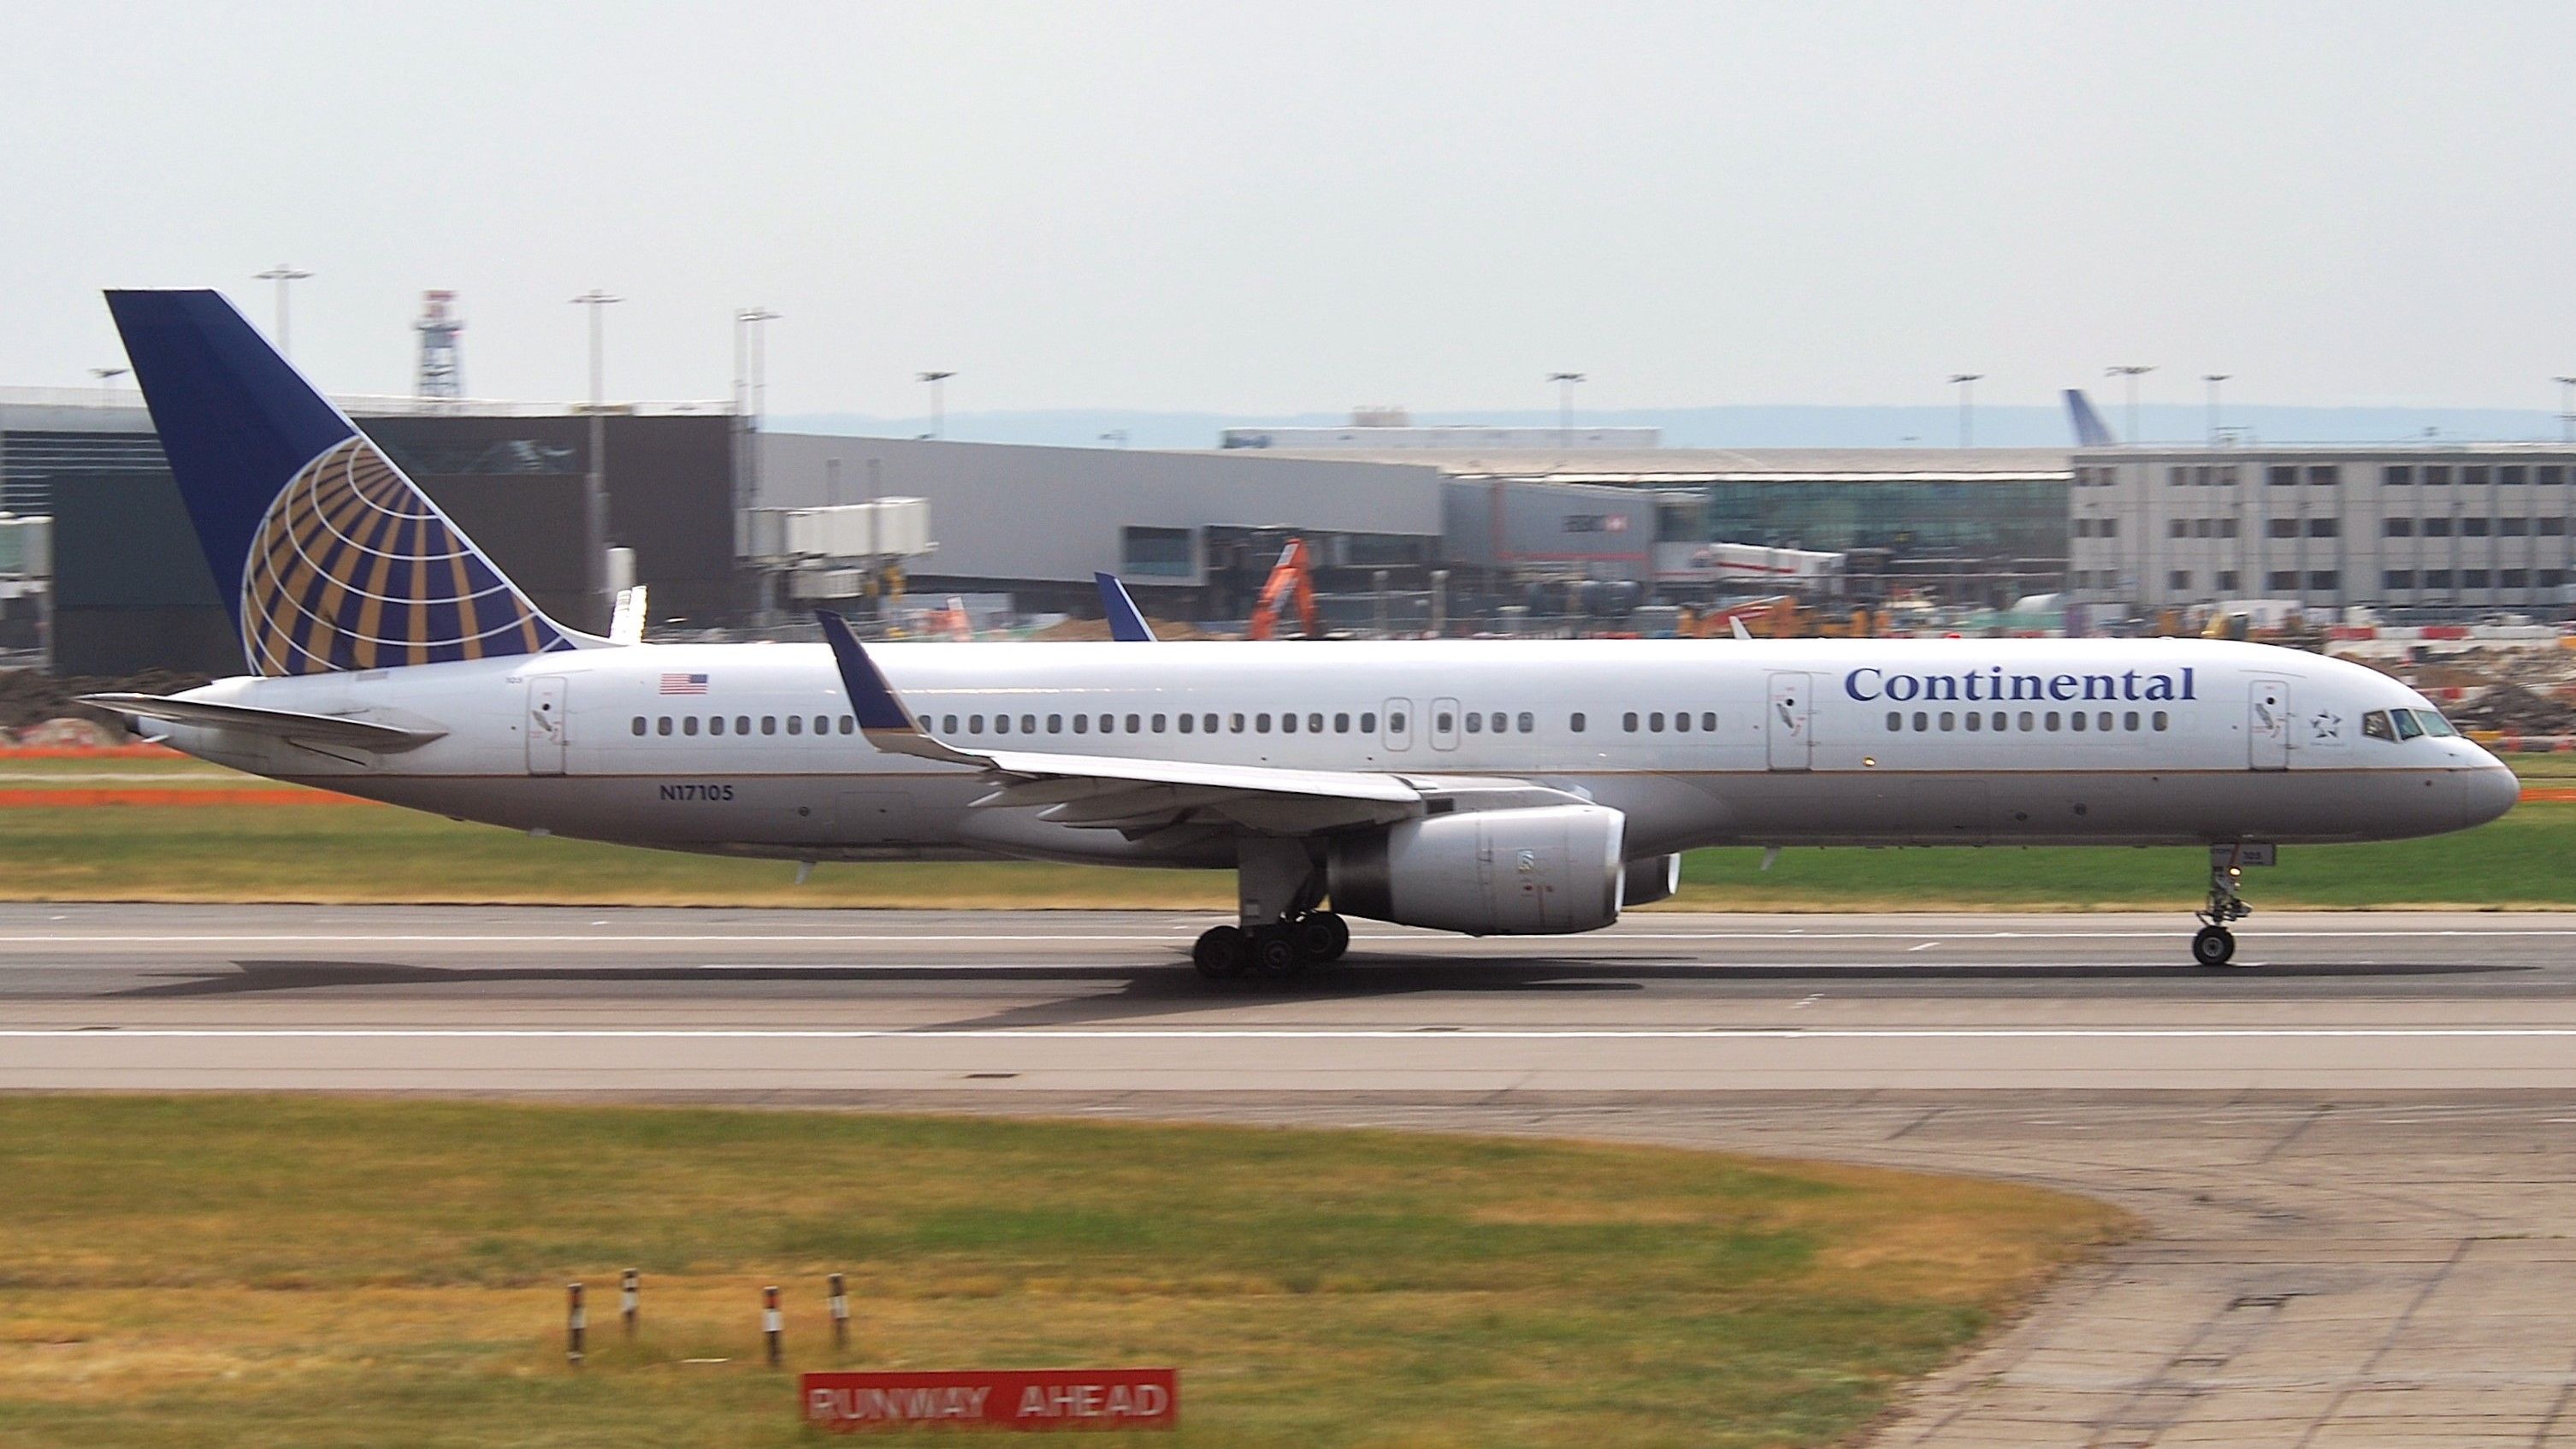 A Continental Airlines Boeing 757 on a runway At London Heathrow Airport.